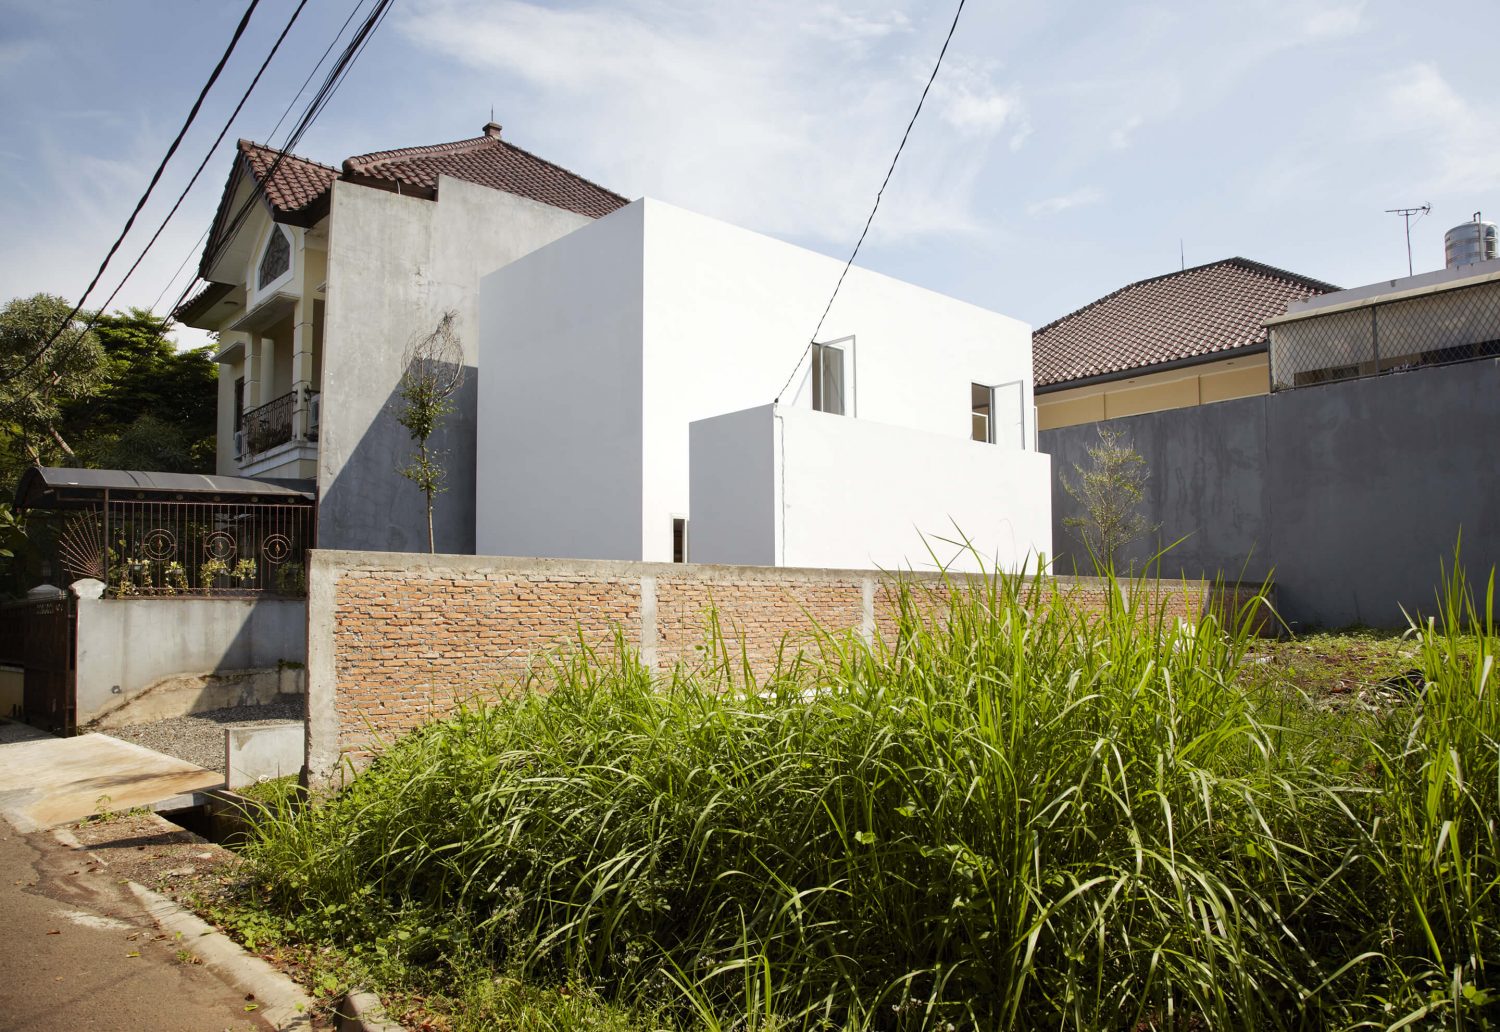 R House by sontangMsiregar Architects